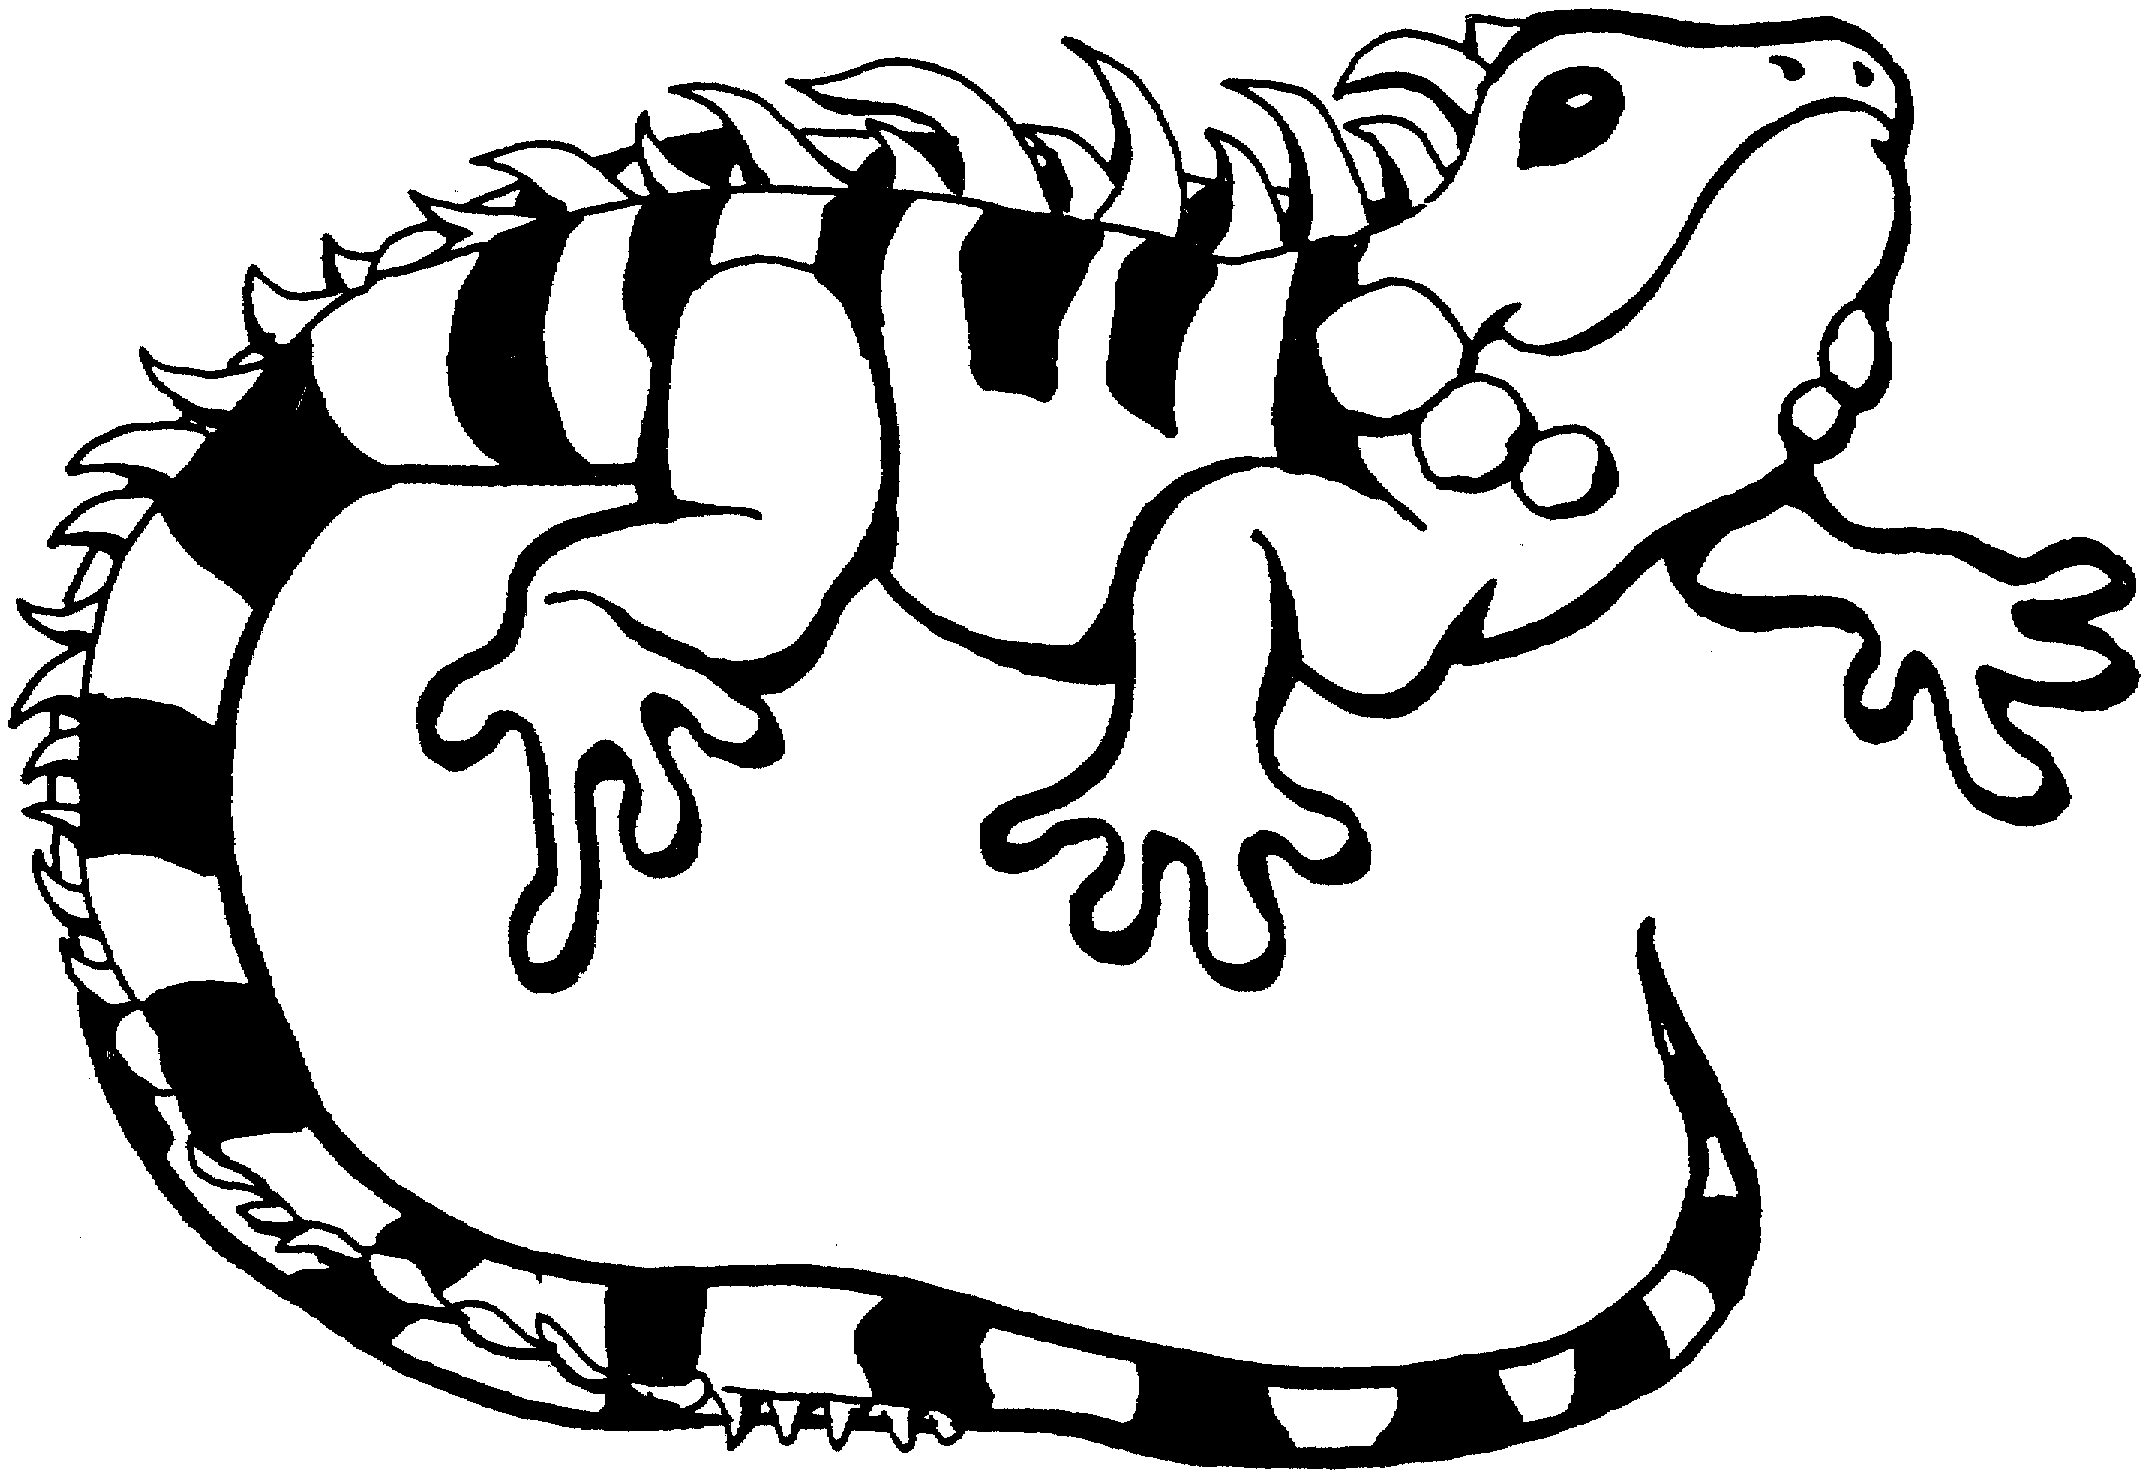 Lizard Printable Coloring Pages - Printable Word Searches